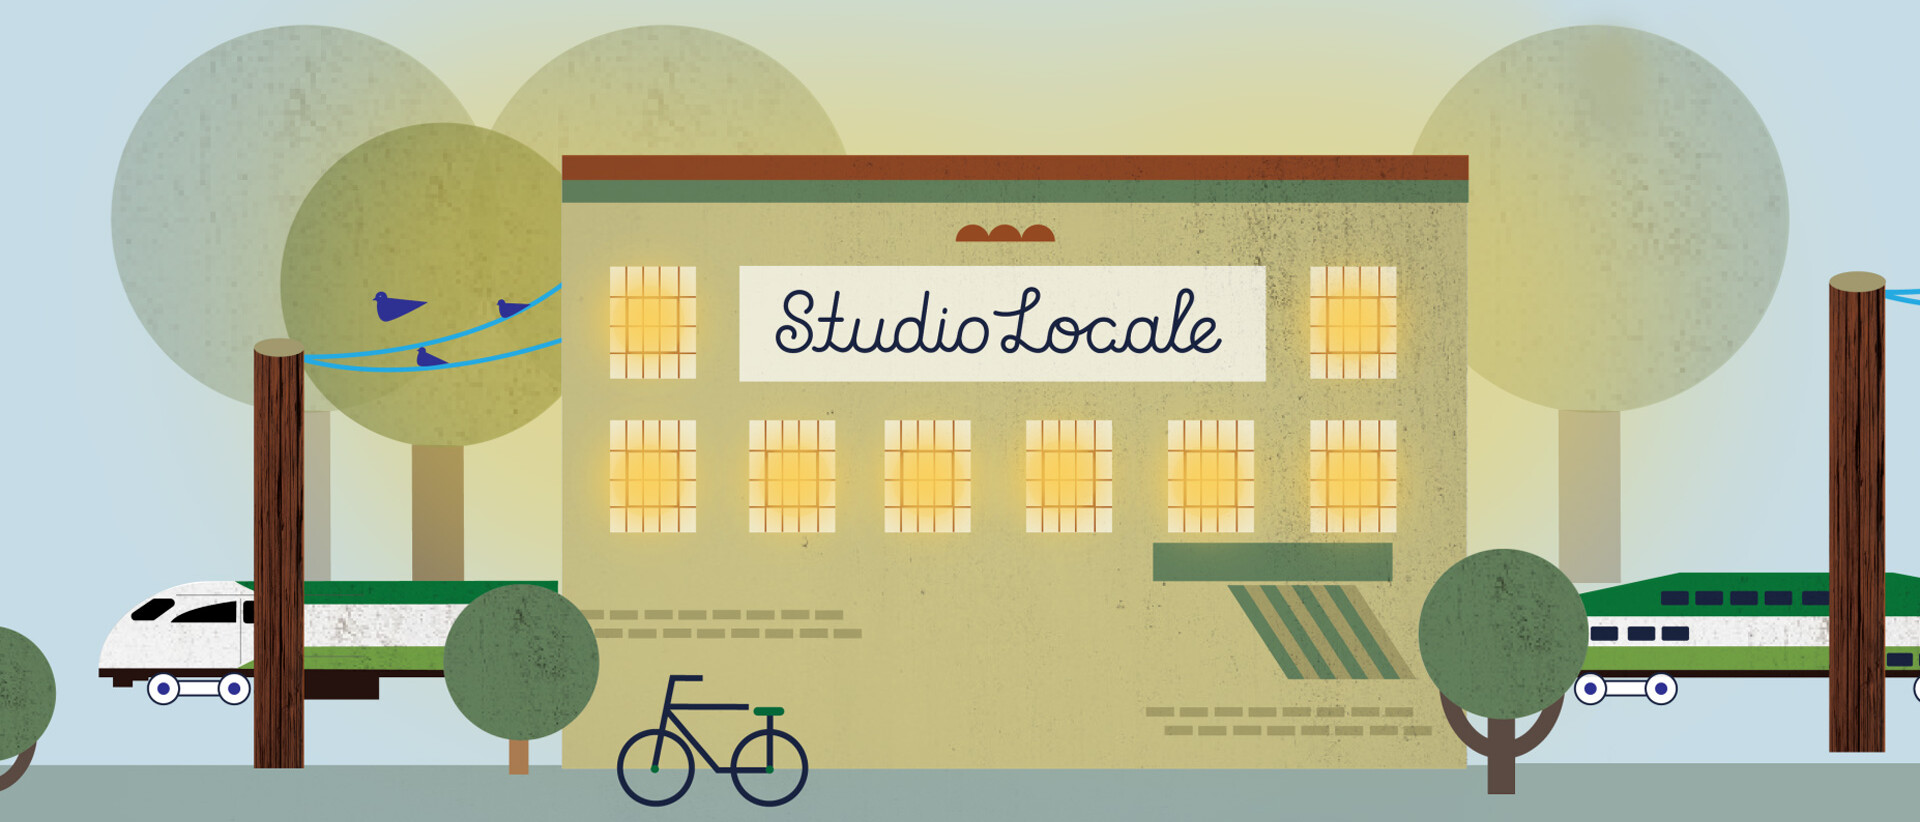 Illustration of the Studio Locale building with all the lights on in the windows